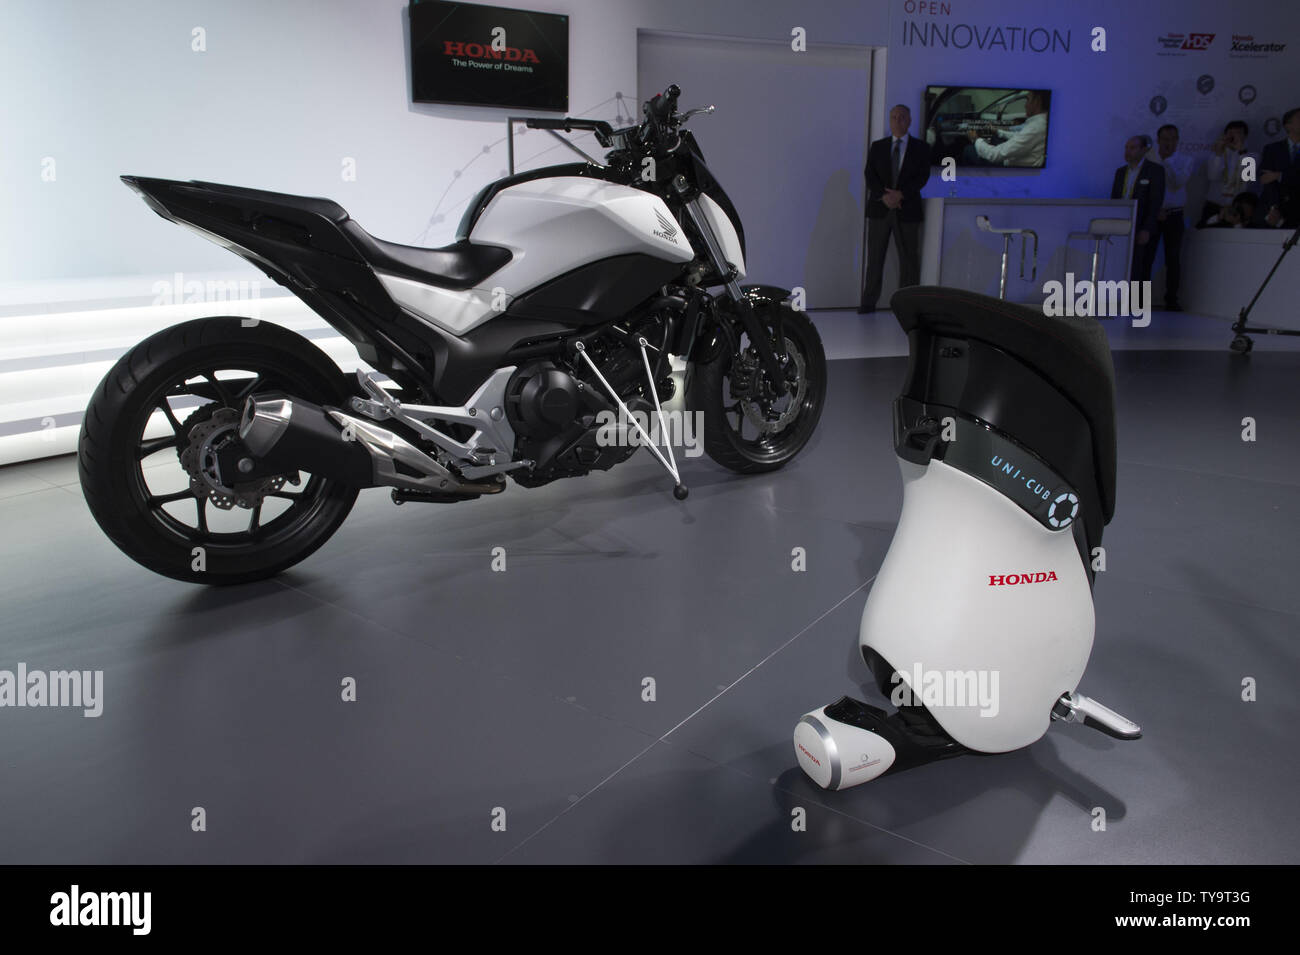 The Honda Riding Assist Motorcycle and the Honda Uni-Cub, a personal transportation device, are introduces at the 2017 International CES, a trade show of consumer electronics, in Las Vegas, Nevada,  January 5, 2017.    Photo by Molly Riley/UPI Stock Photo